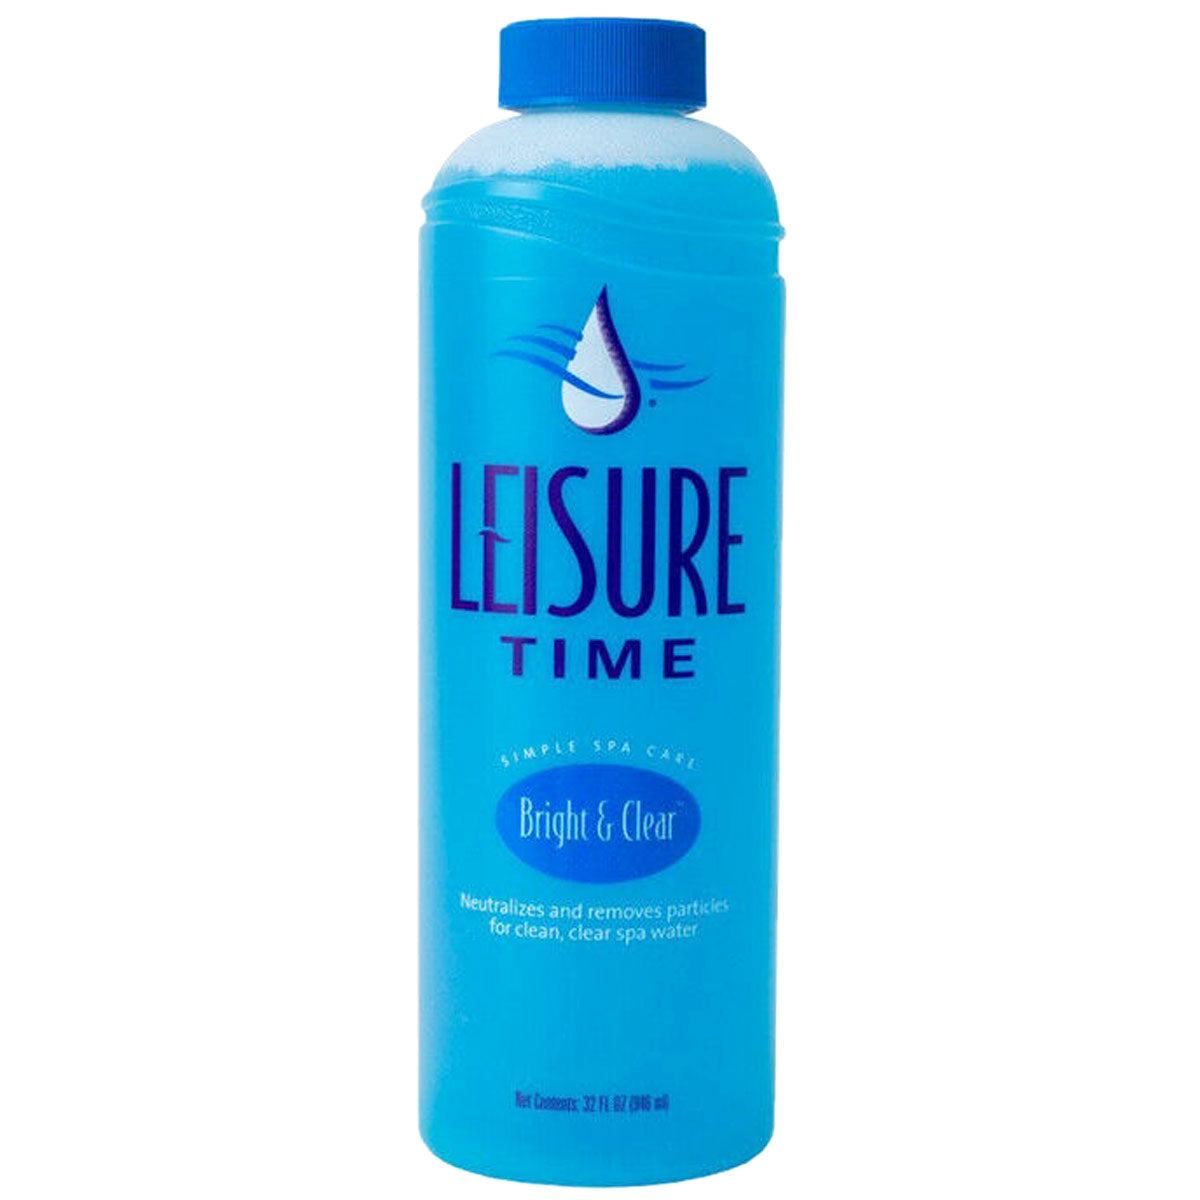 Leisure Time Bright and Clear water clarifier for hot tubs and spas